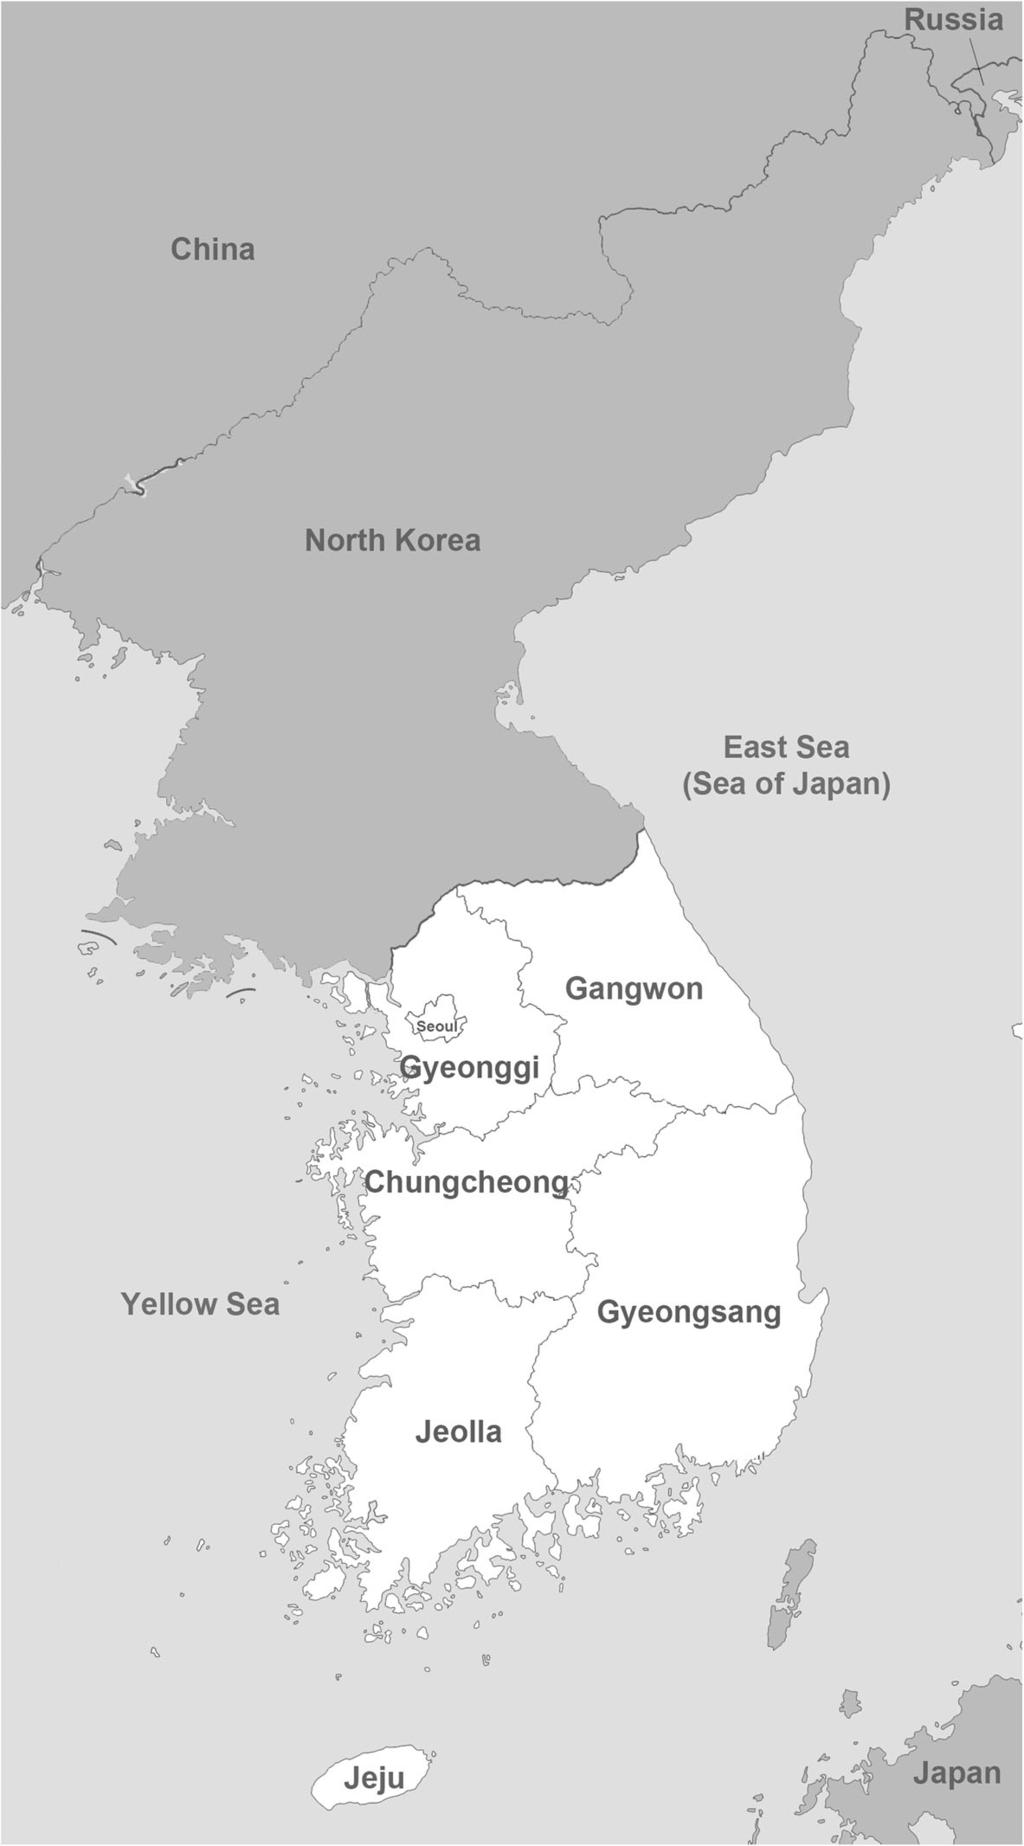 Suh et al. Parasites & Vectors (2017) 10:146 Page 3 of 8 Fig. 1 Distribution map showing the location of the 5 major provincial divisions in the Republic of Korea.